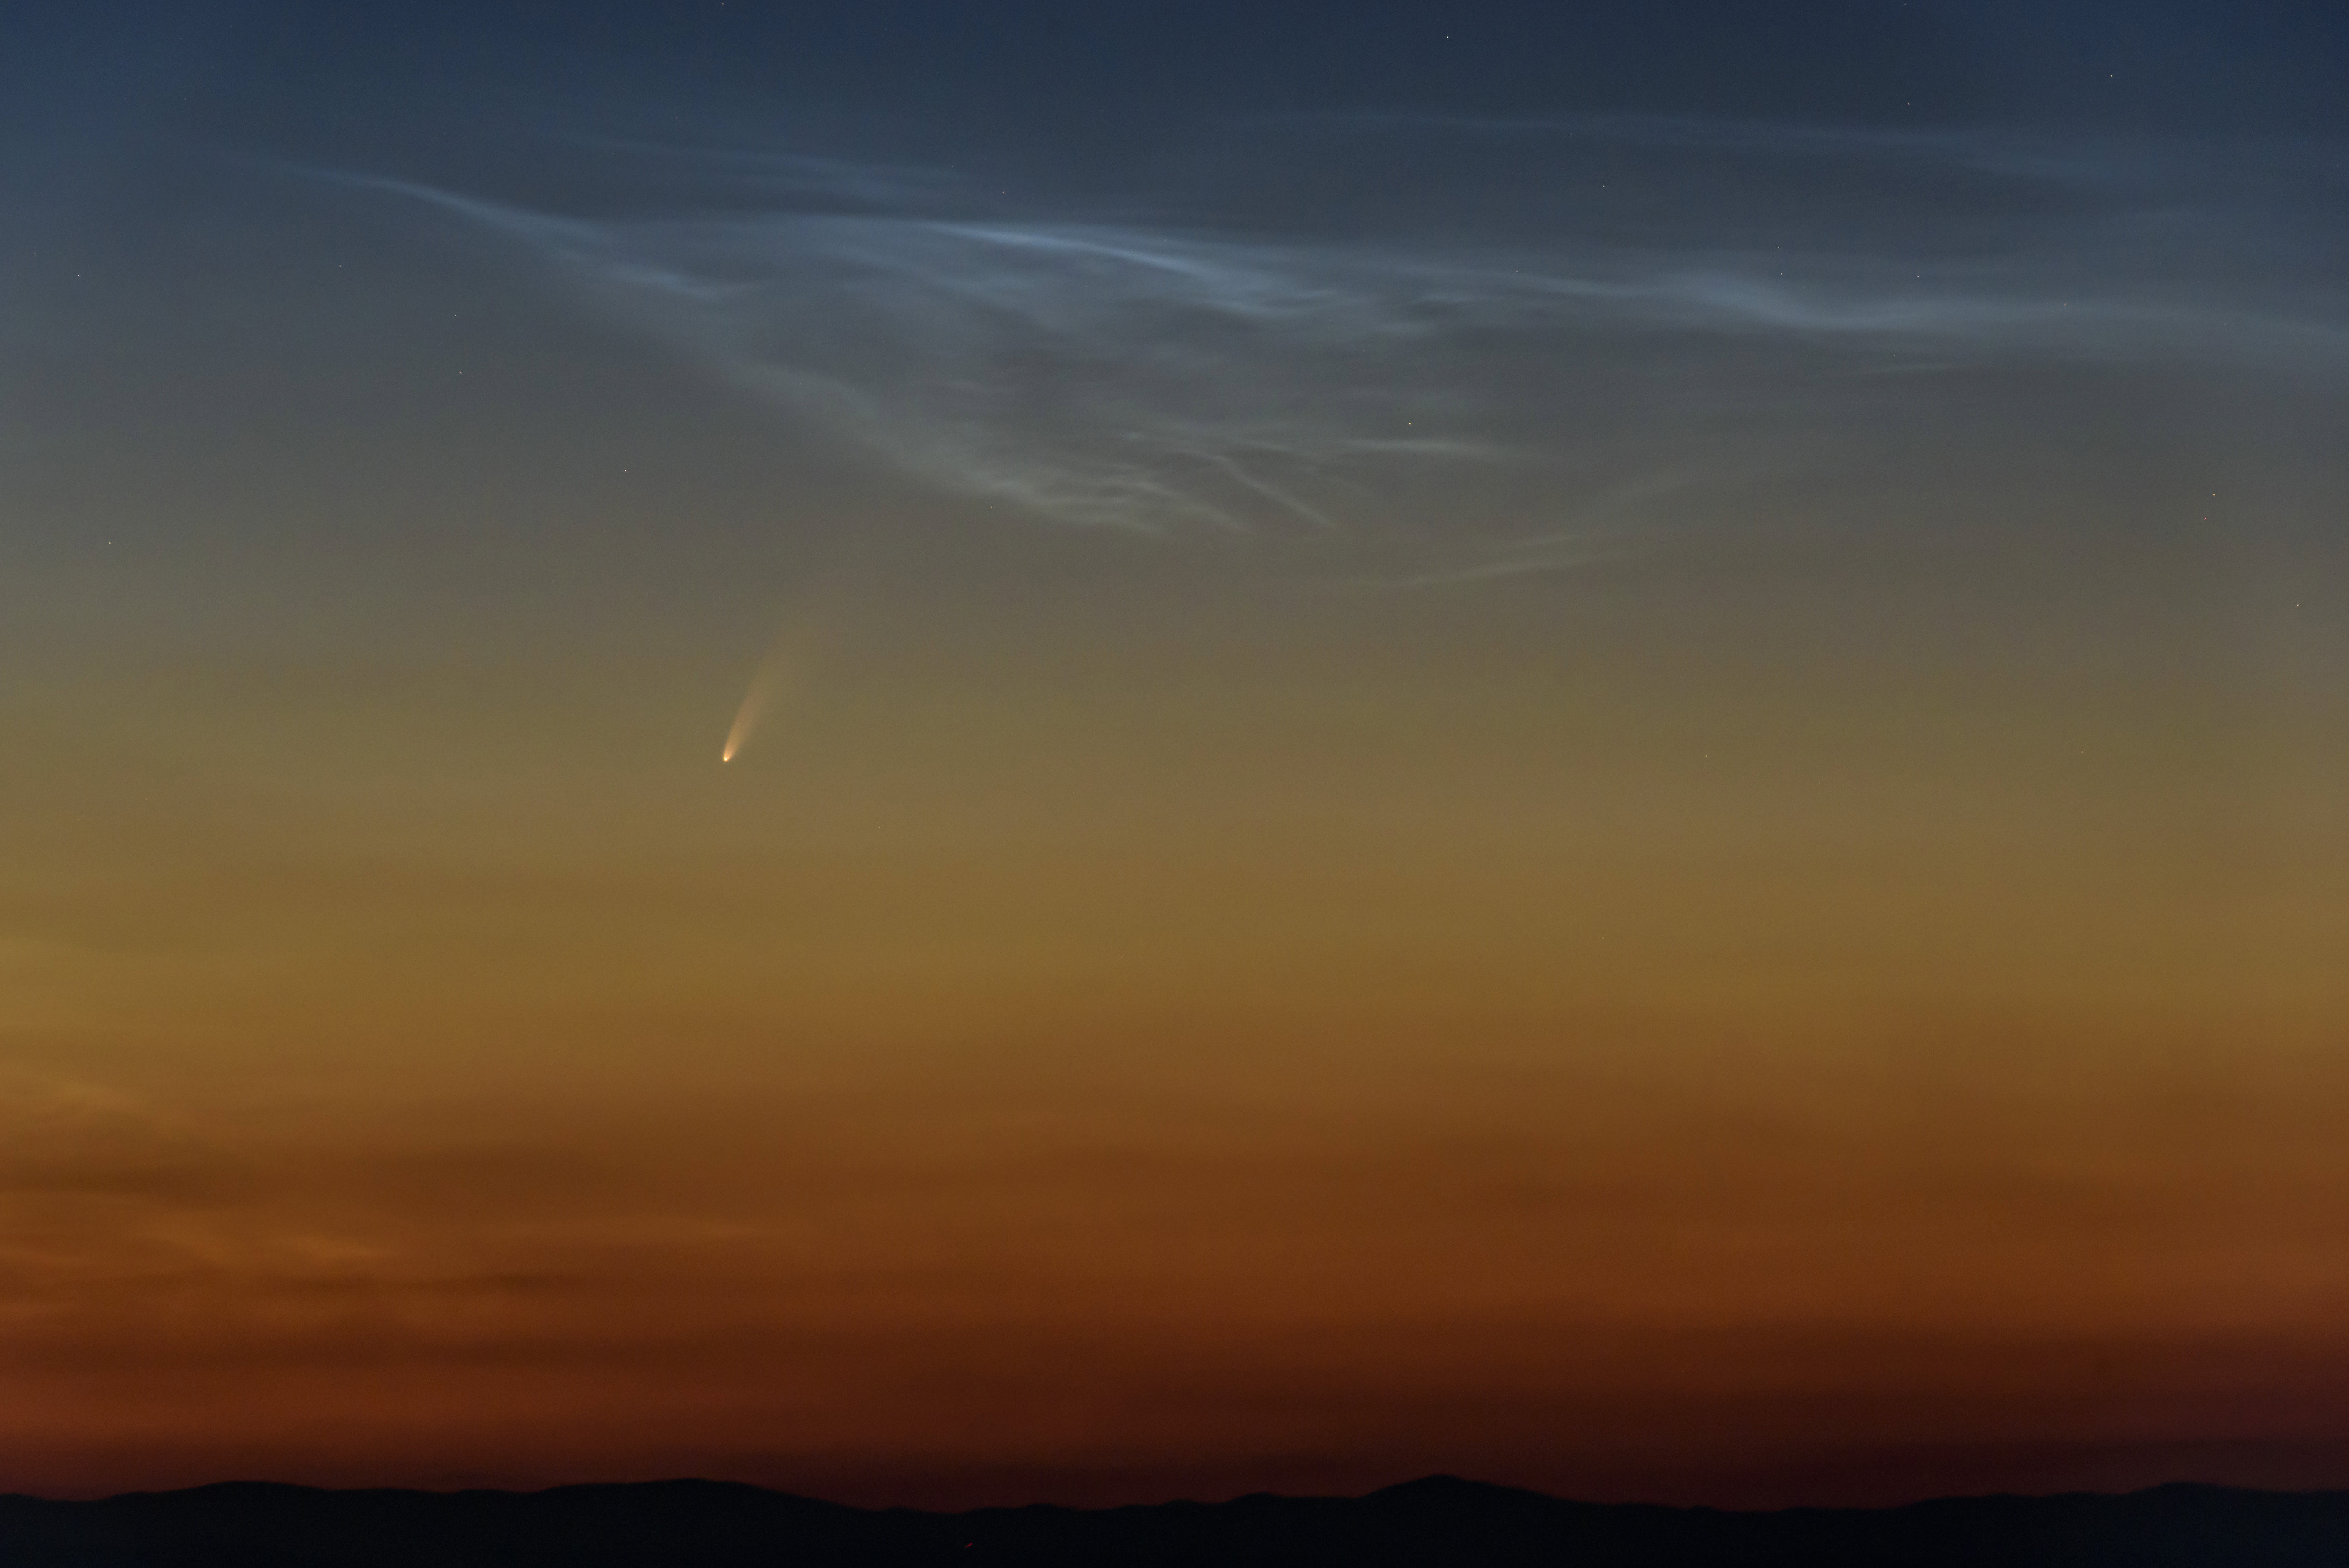 How To See Comet Neowise Streaking Past Earth Before It Disappears